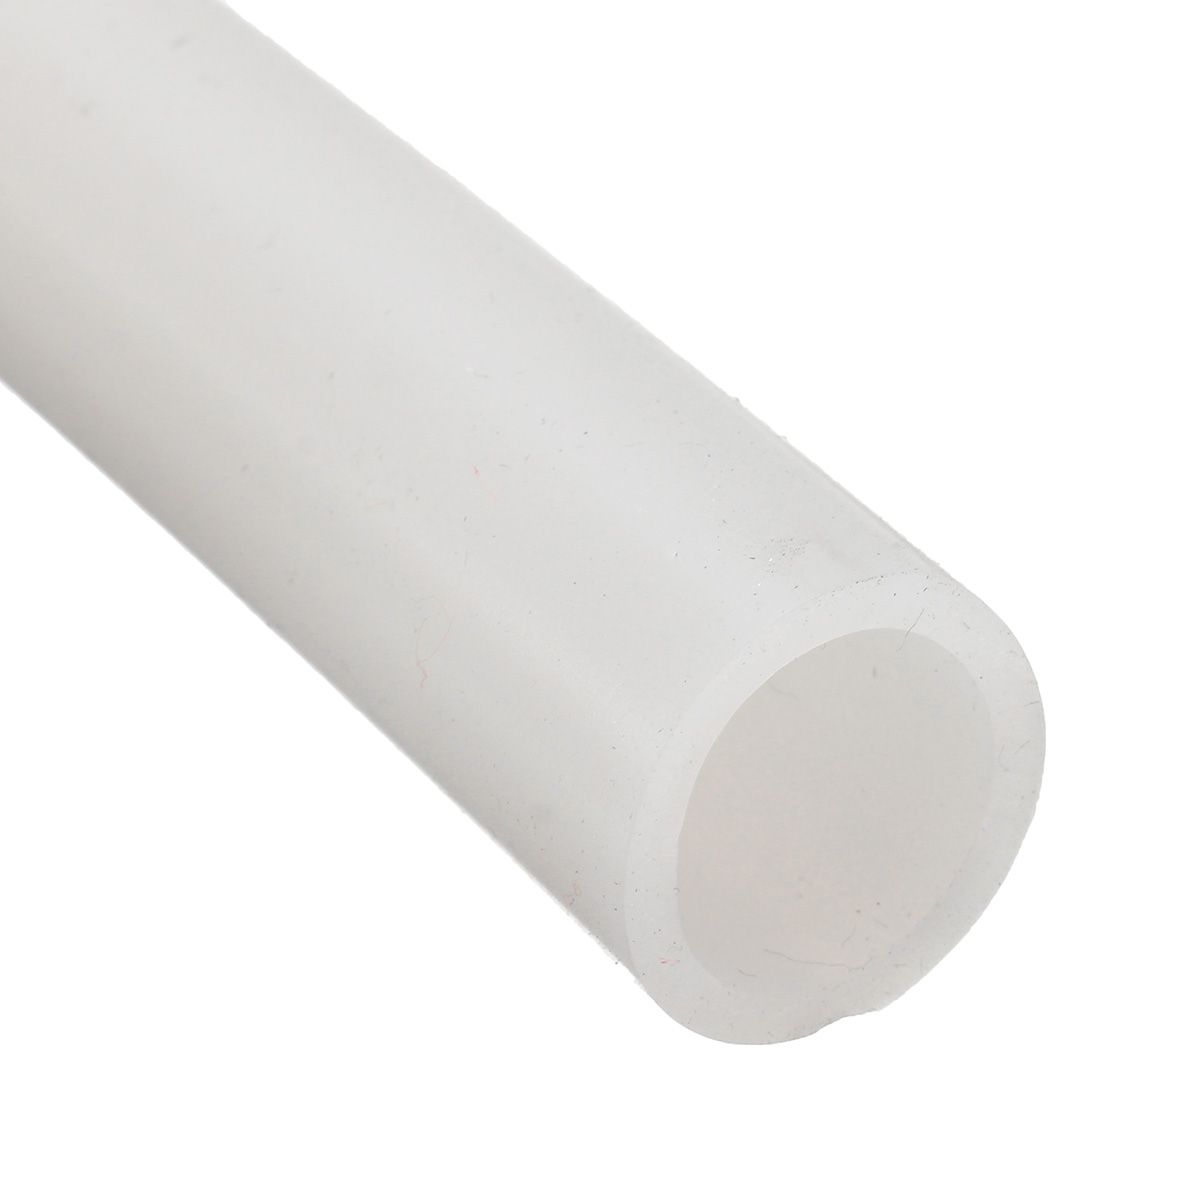 15x19mm10x14mm-Silicone-Hose-Flexible-Tube-Pipe-Beer-Water-Air-Pump-Hose-1m-1342354